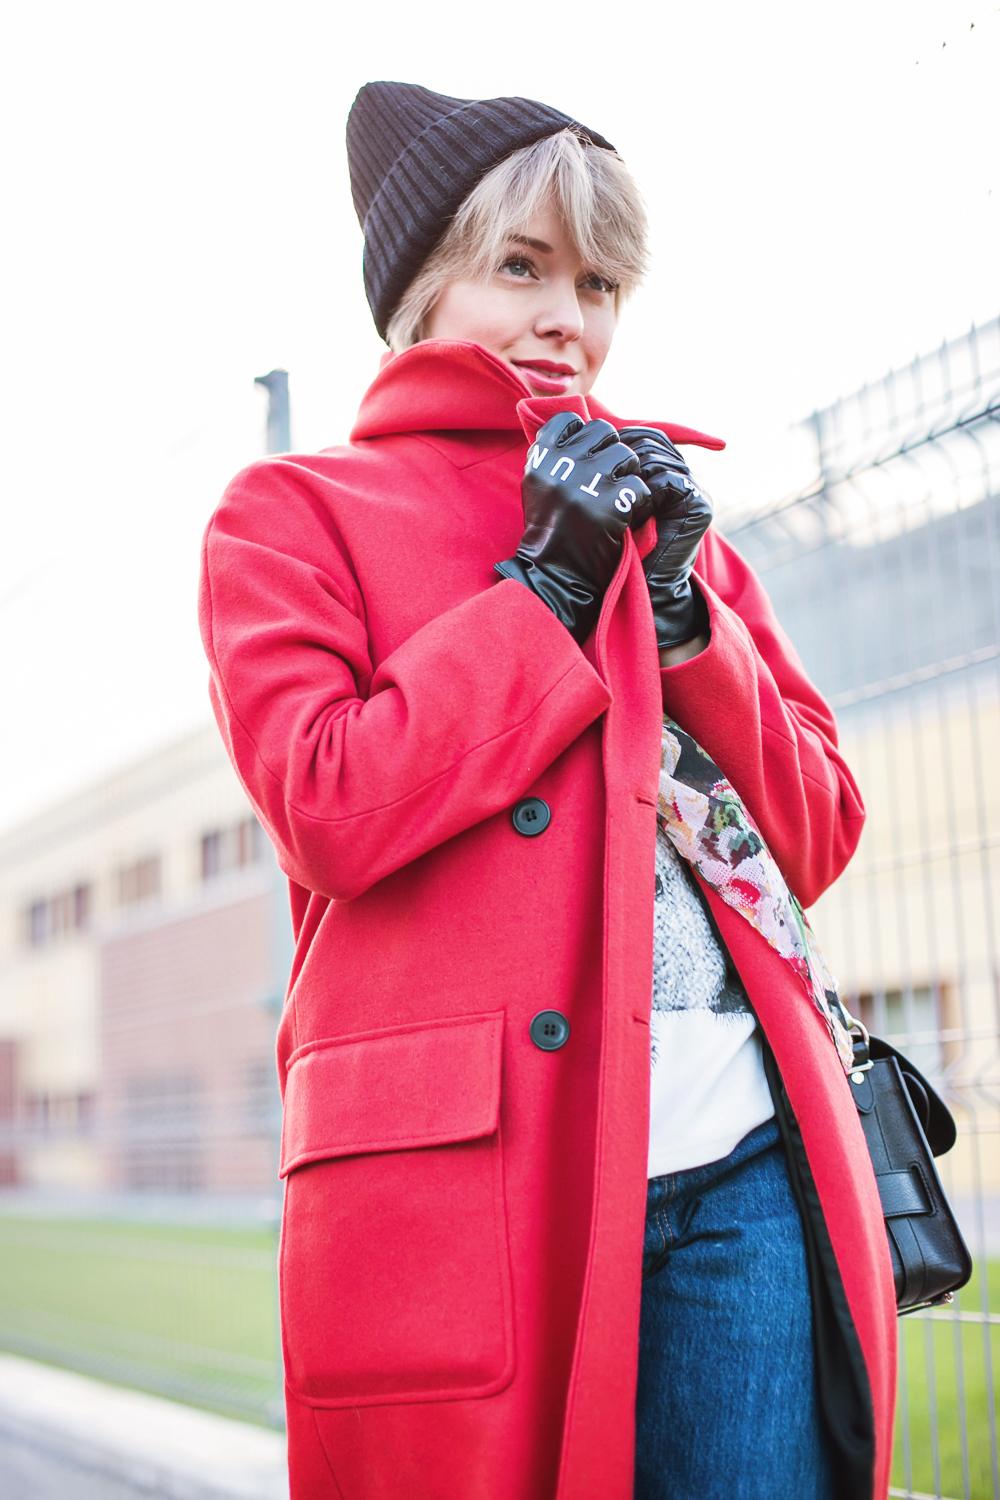 darya kamalova thecablook fashion blog russian blogger italy moda street style pixie short hair fashion blogger asos red long coat boyfriend beanie stunning gloves roses scarf jeand levis proenza schouler ps11 bag cheap monday sneakers-28 копия